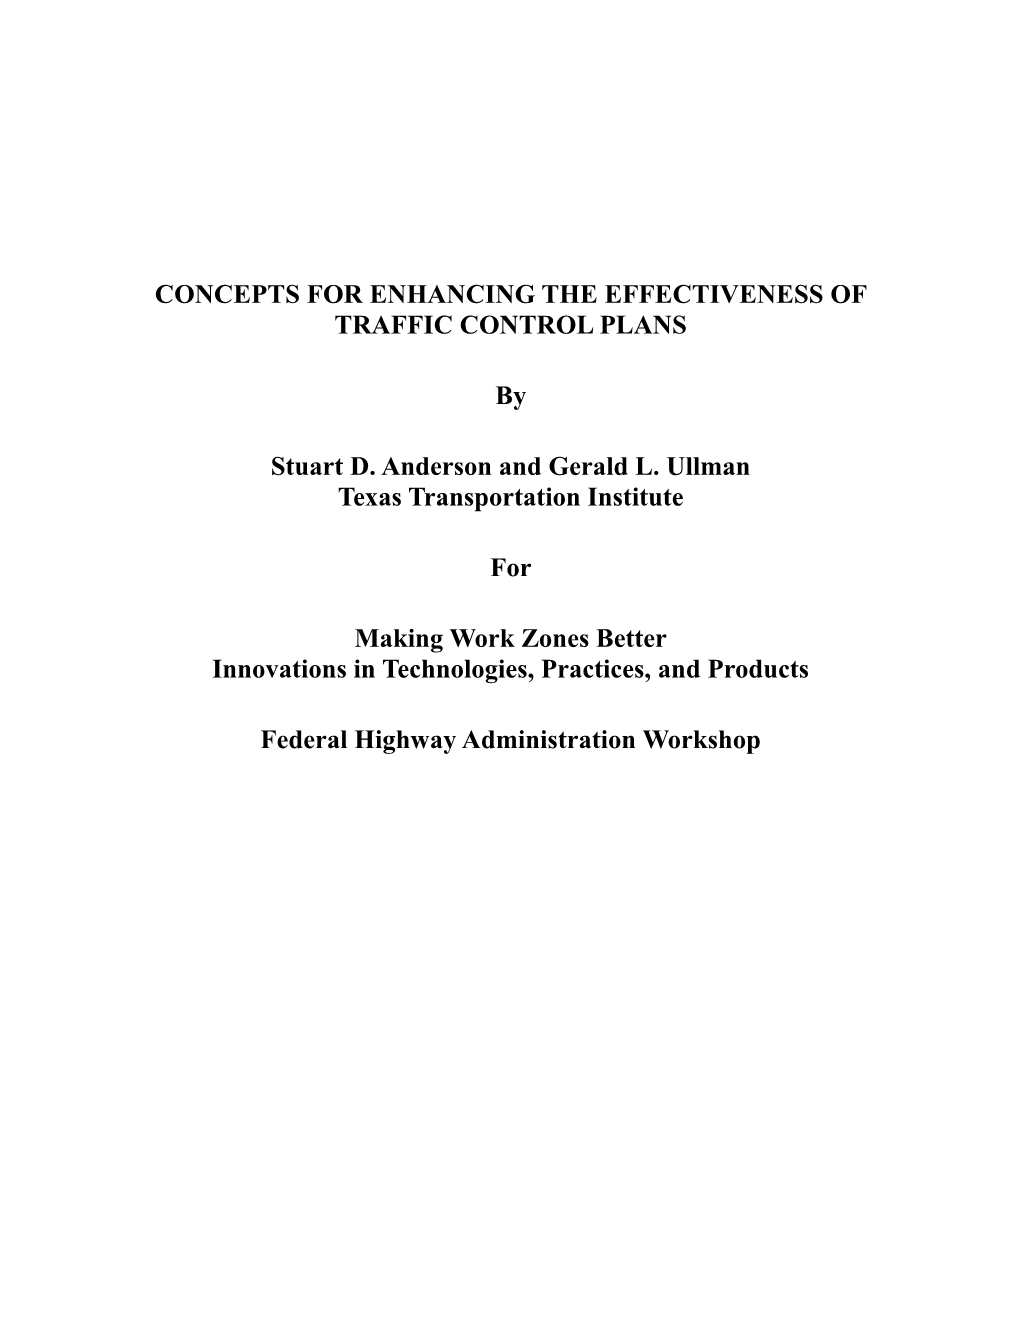 Concepts for Enhancing the Effectiveness of Traffic Control Plans